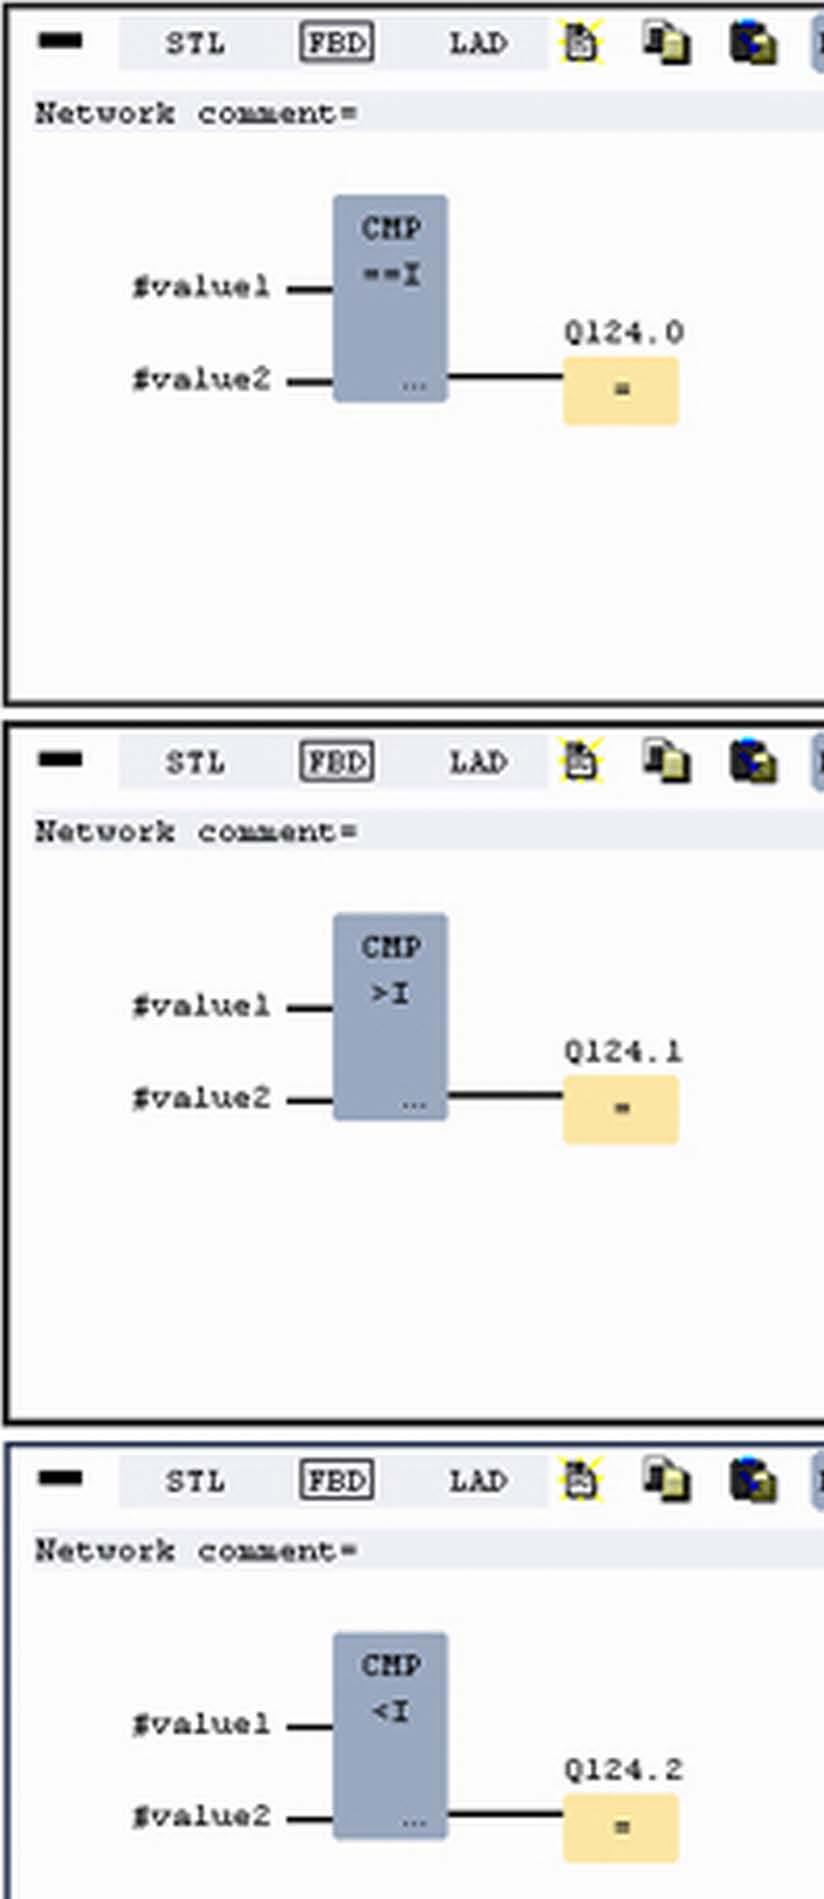 WinPLC7 VIPA System 300S + Example project engineering > Project engineering Adding a new network For further comparisons the operations "CMP>I" at Q 124.1 and "CMP<I" at Q 124.2 are necessary.